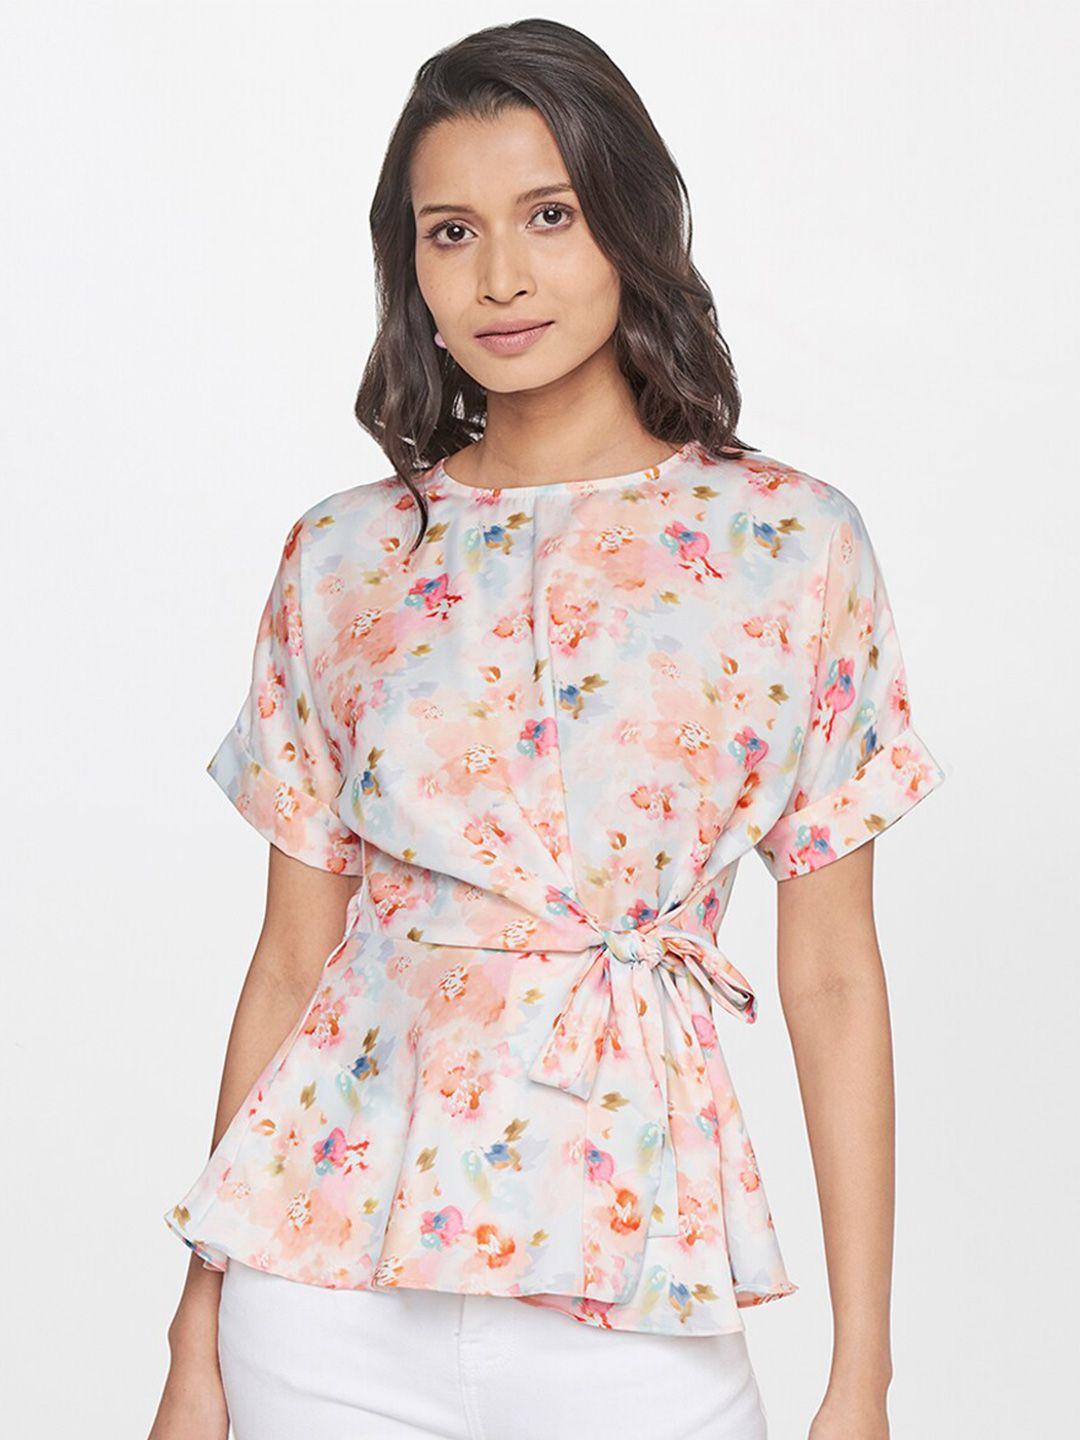 and peach-coloured floral print shirt style top